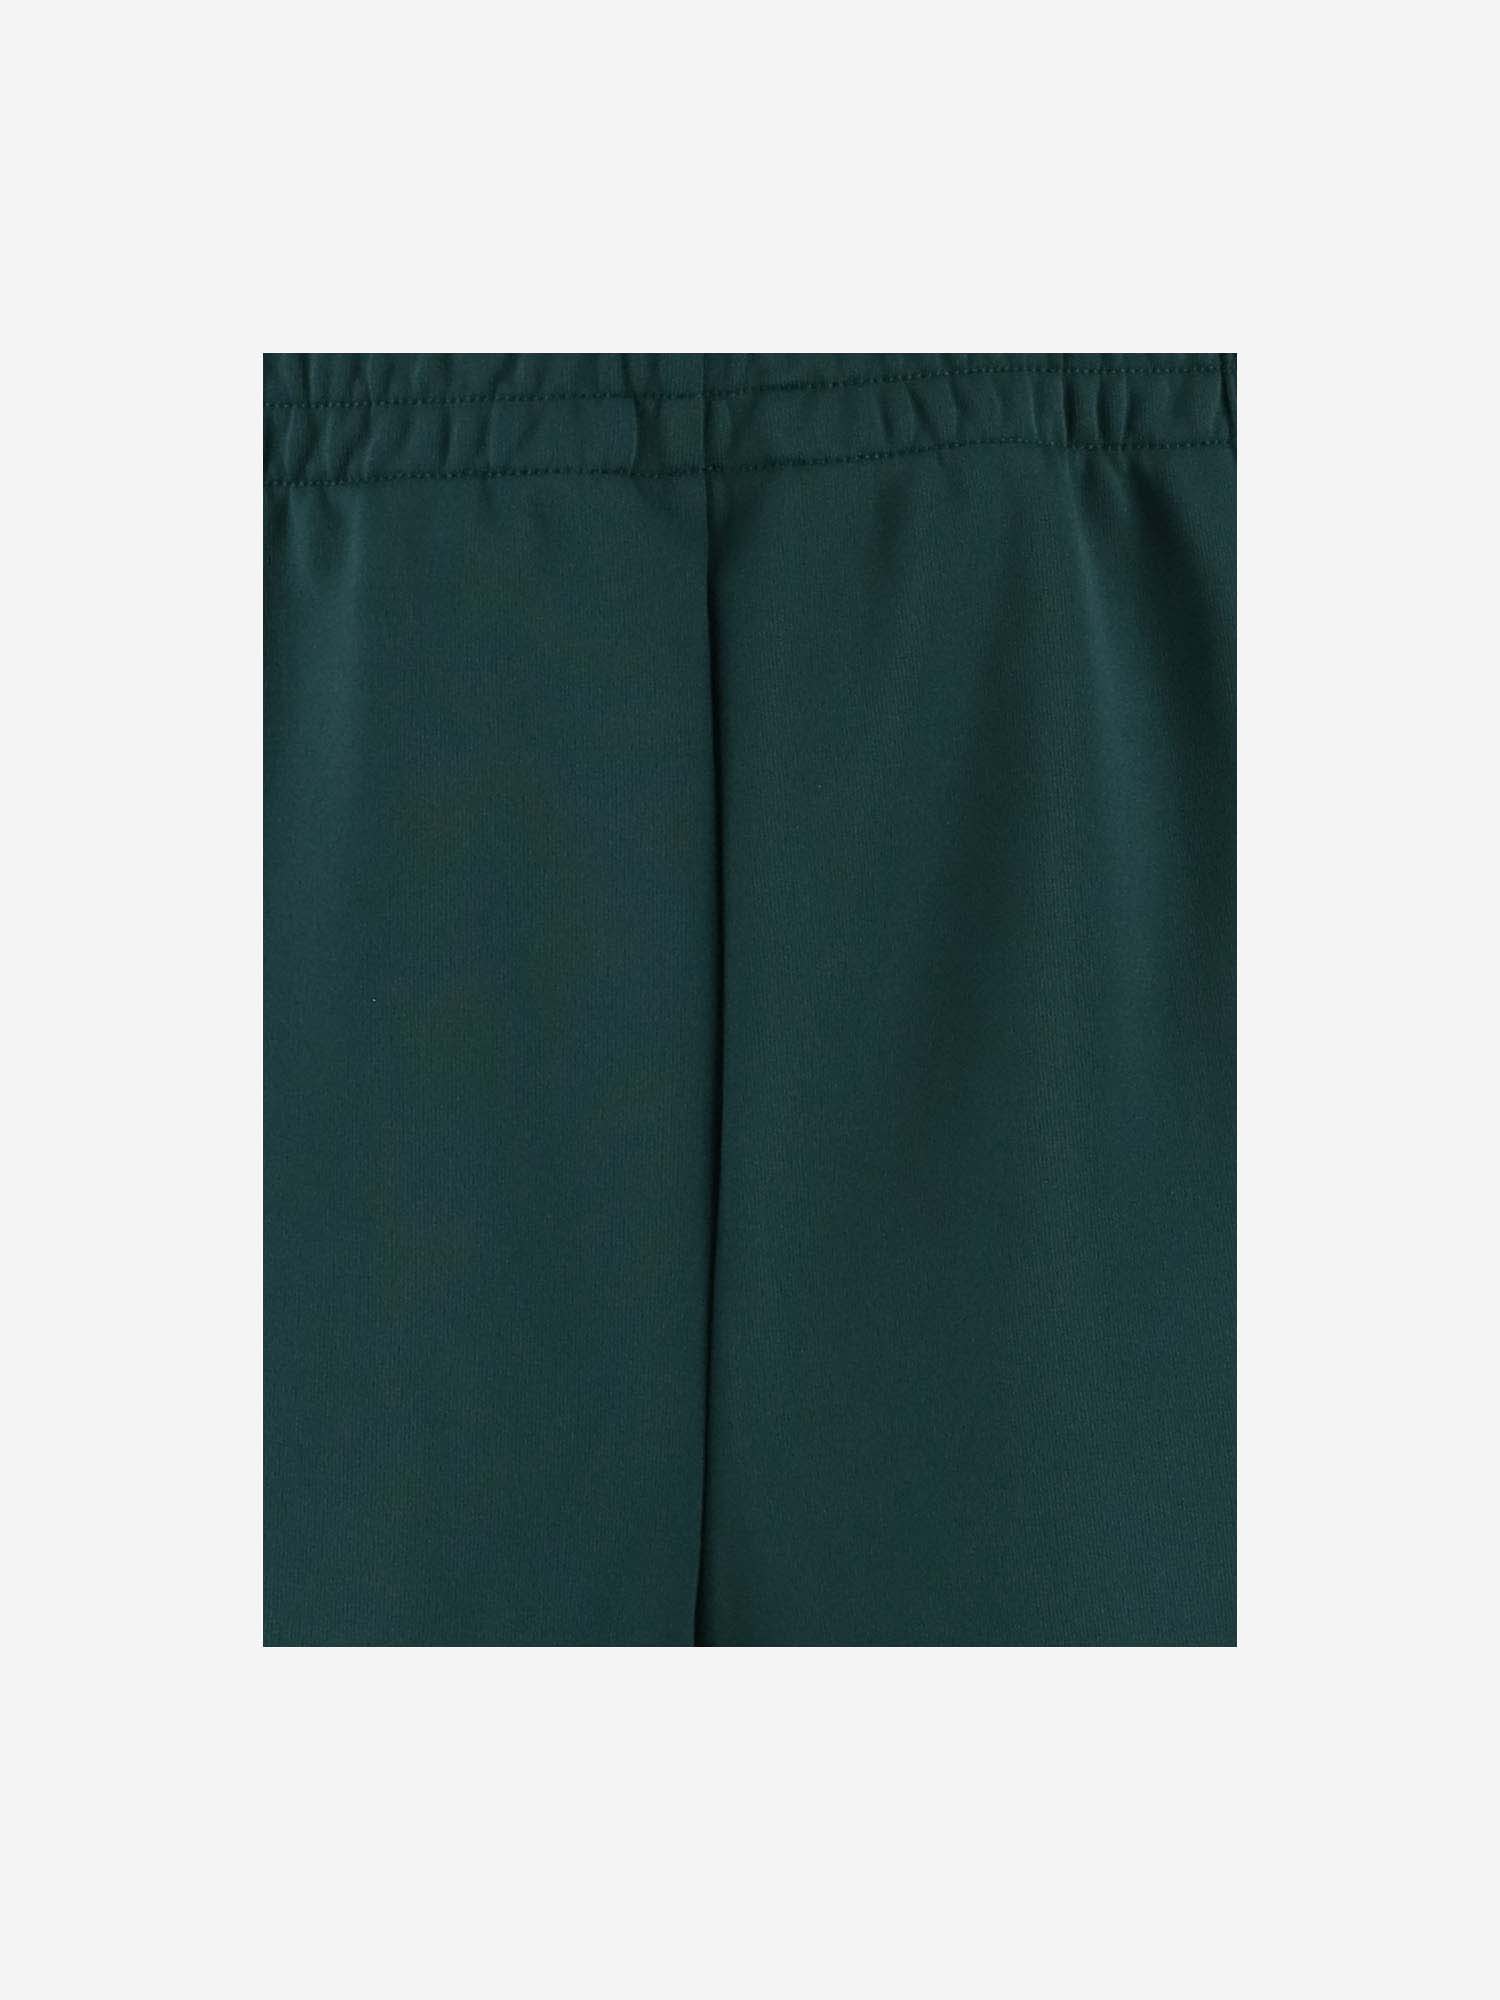 Shop Carhartt Sports Pants Made Of Technical Fabric In Verde